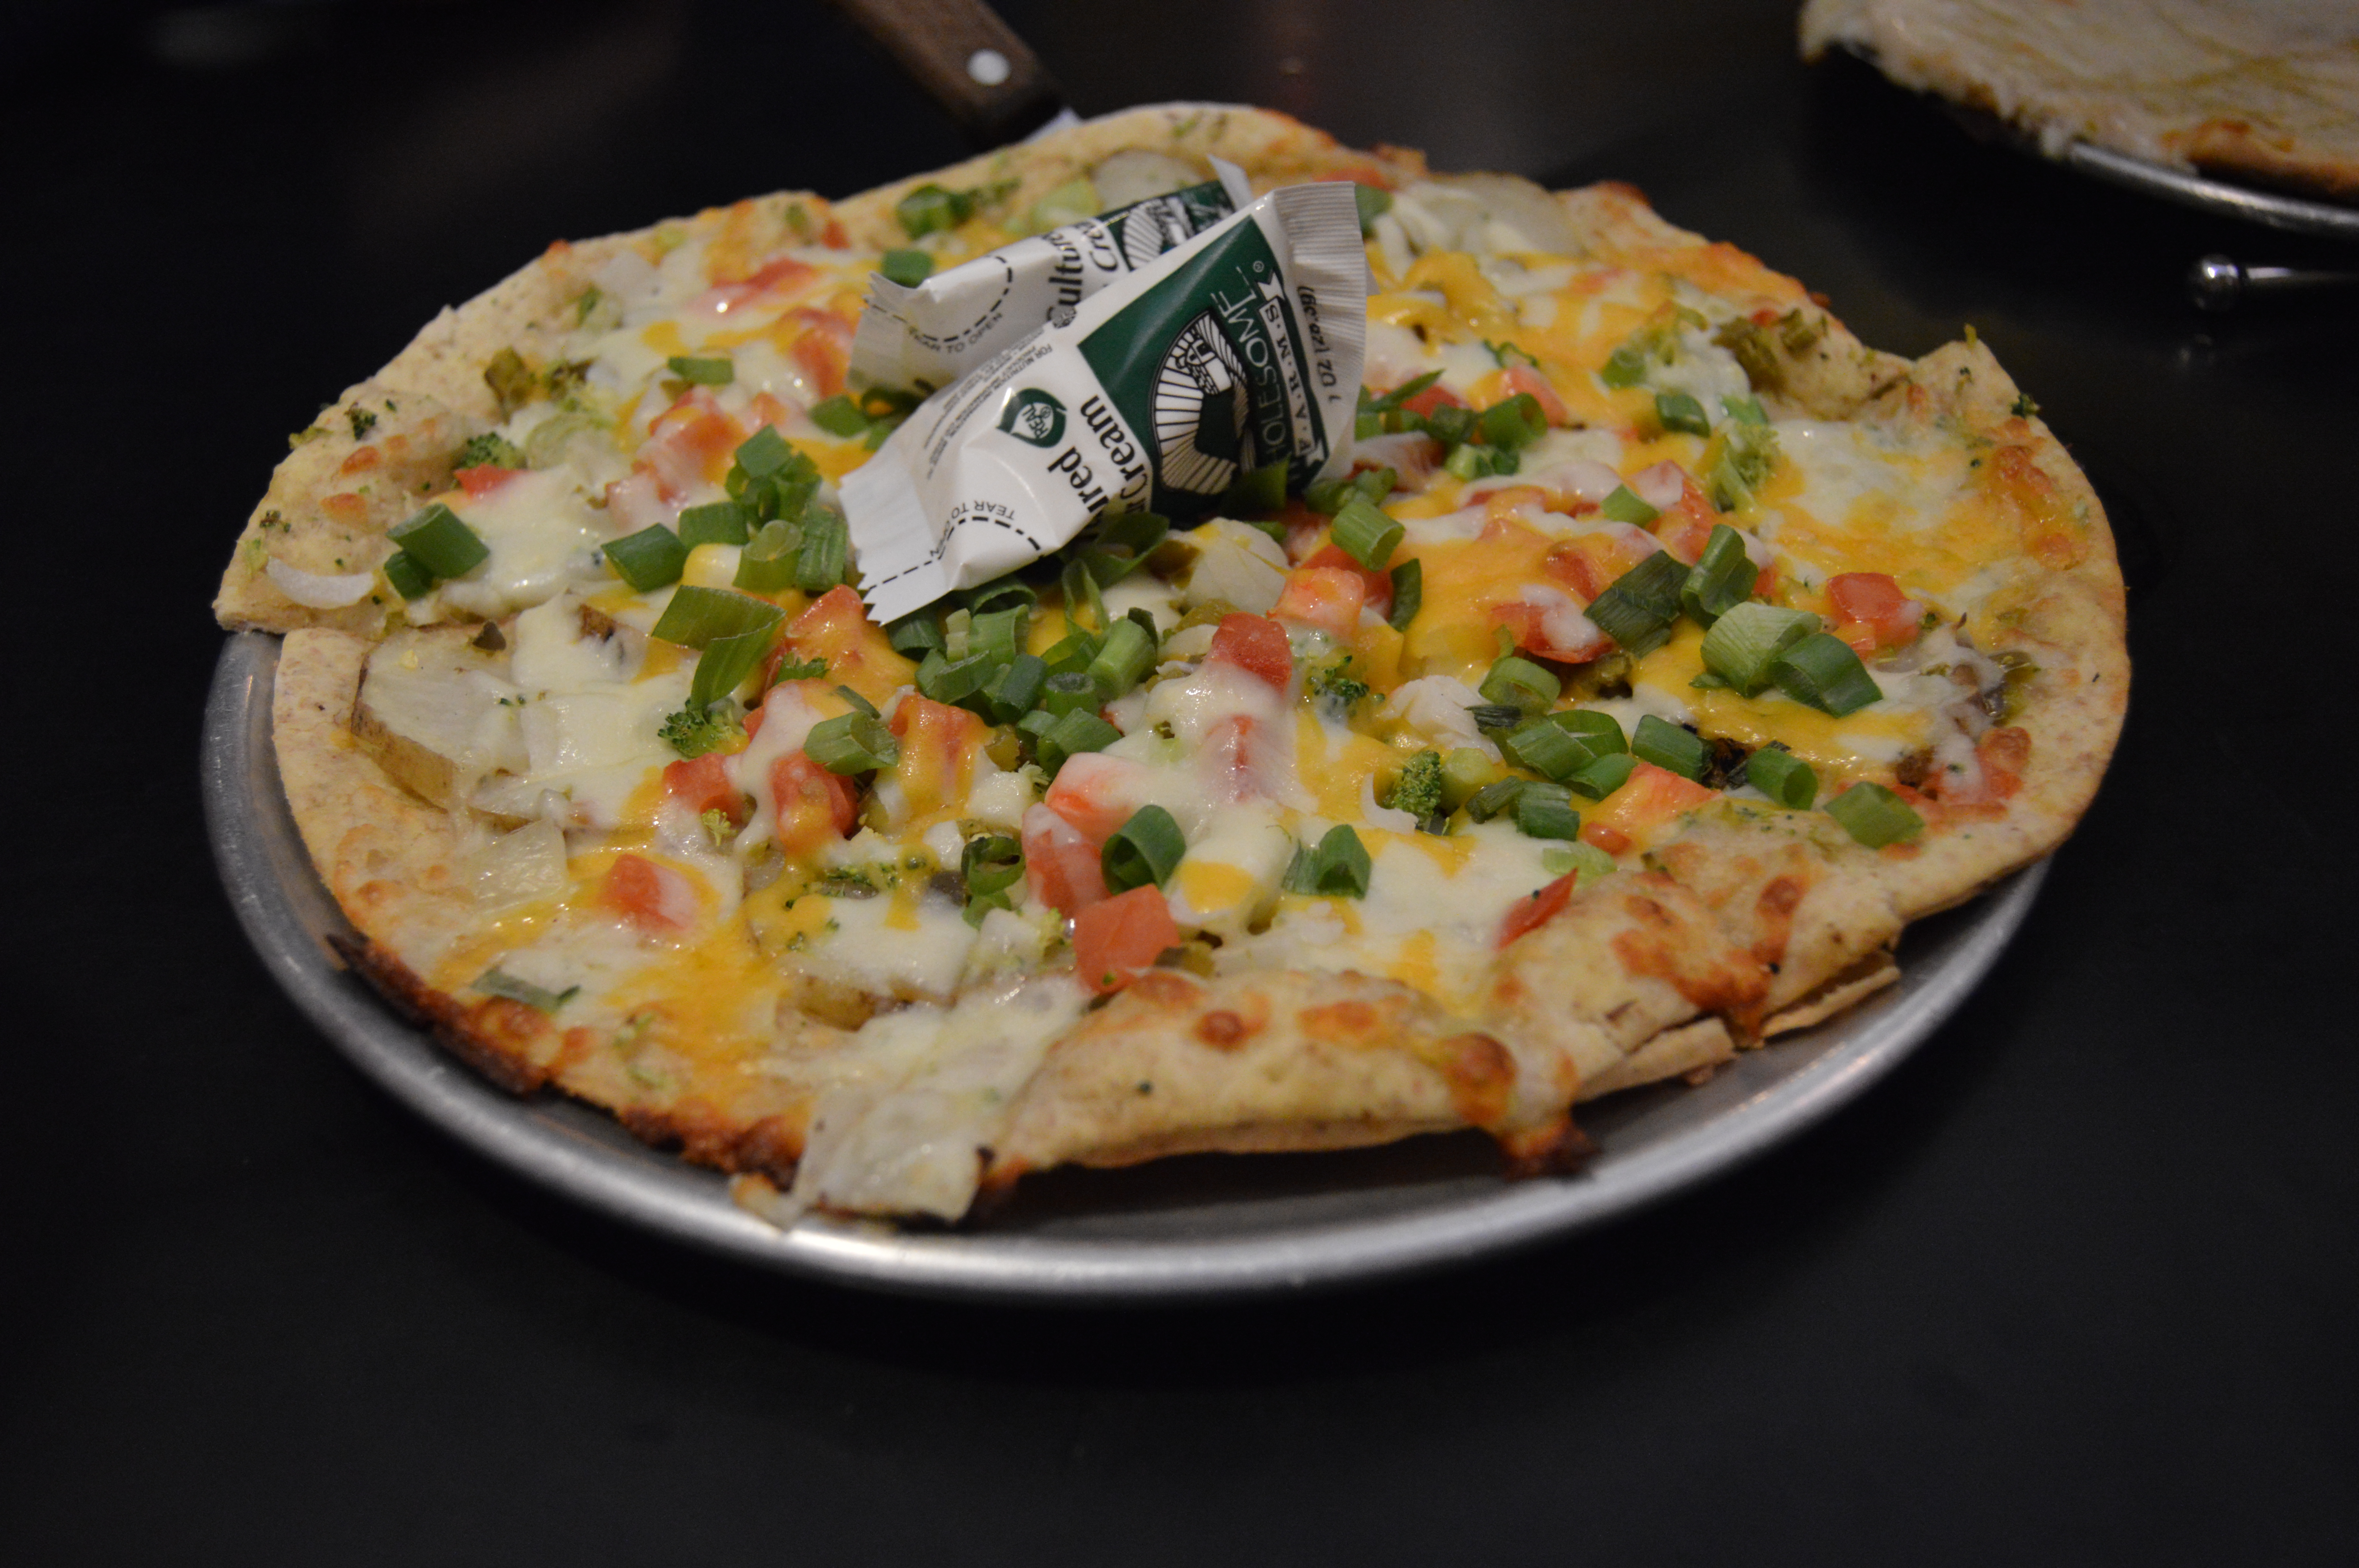 Groupon Coupons: How to get more pizza for your money in Des Moines